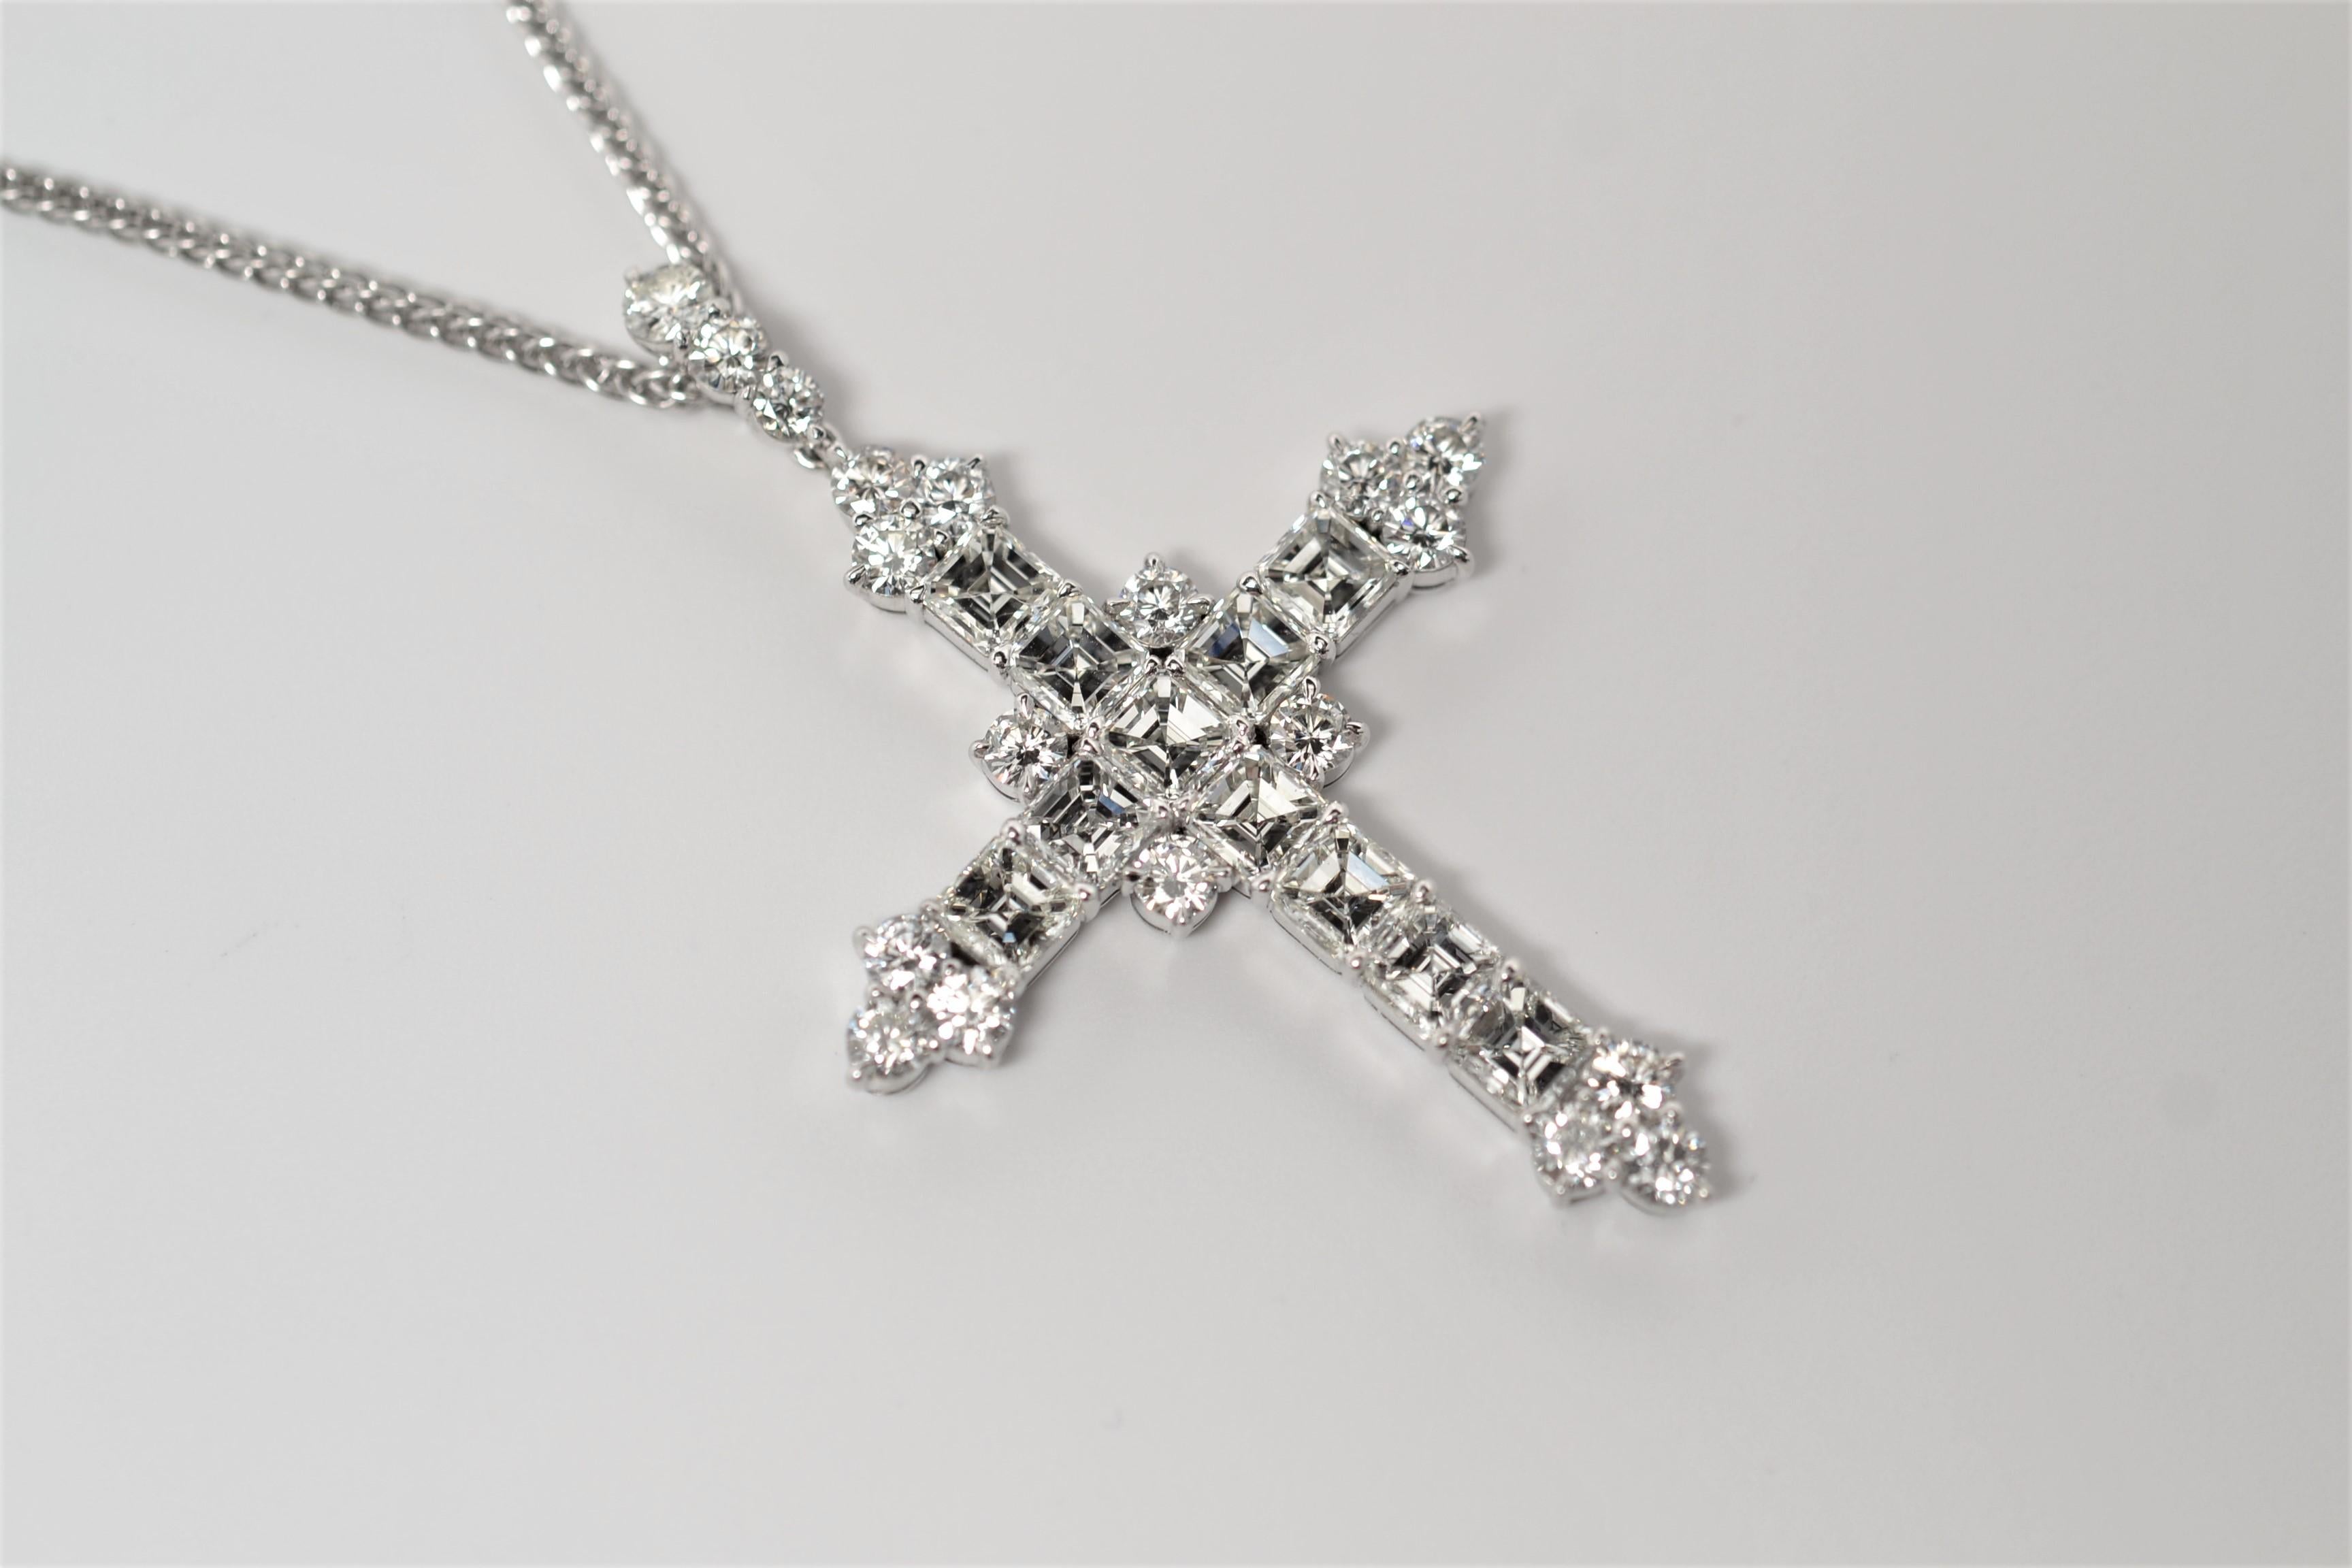 Finely crafted Platinum and Diamond Cross Necklace set with Asscher Cut and Round Brilliant Cut Diamonds. Eleven (11) Asscher Cut Diamonds with a total weight of 3.52ct and nineteen (19) Round Brilliant Cut Diamonds with a total weight of 1.68ct. 